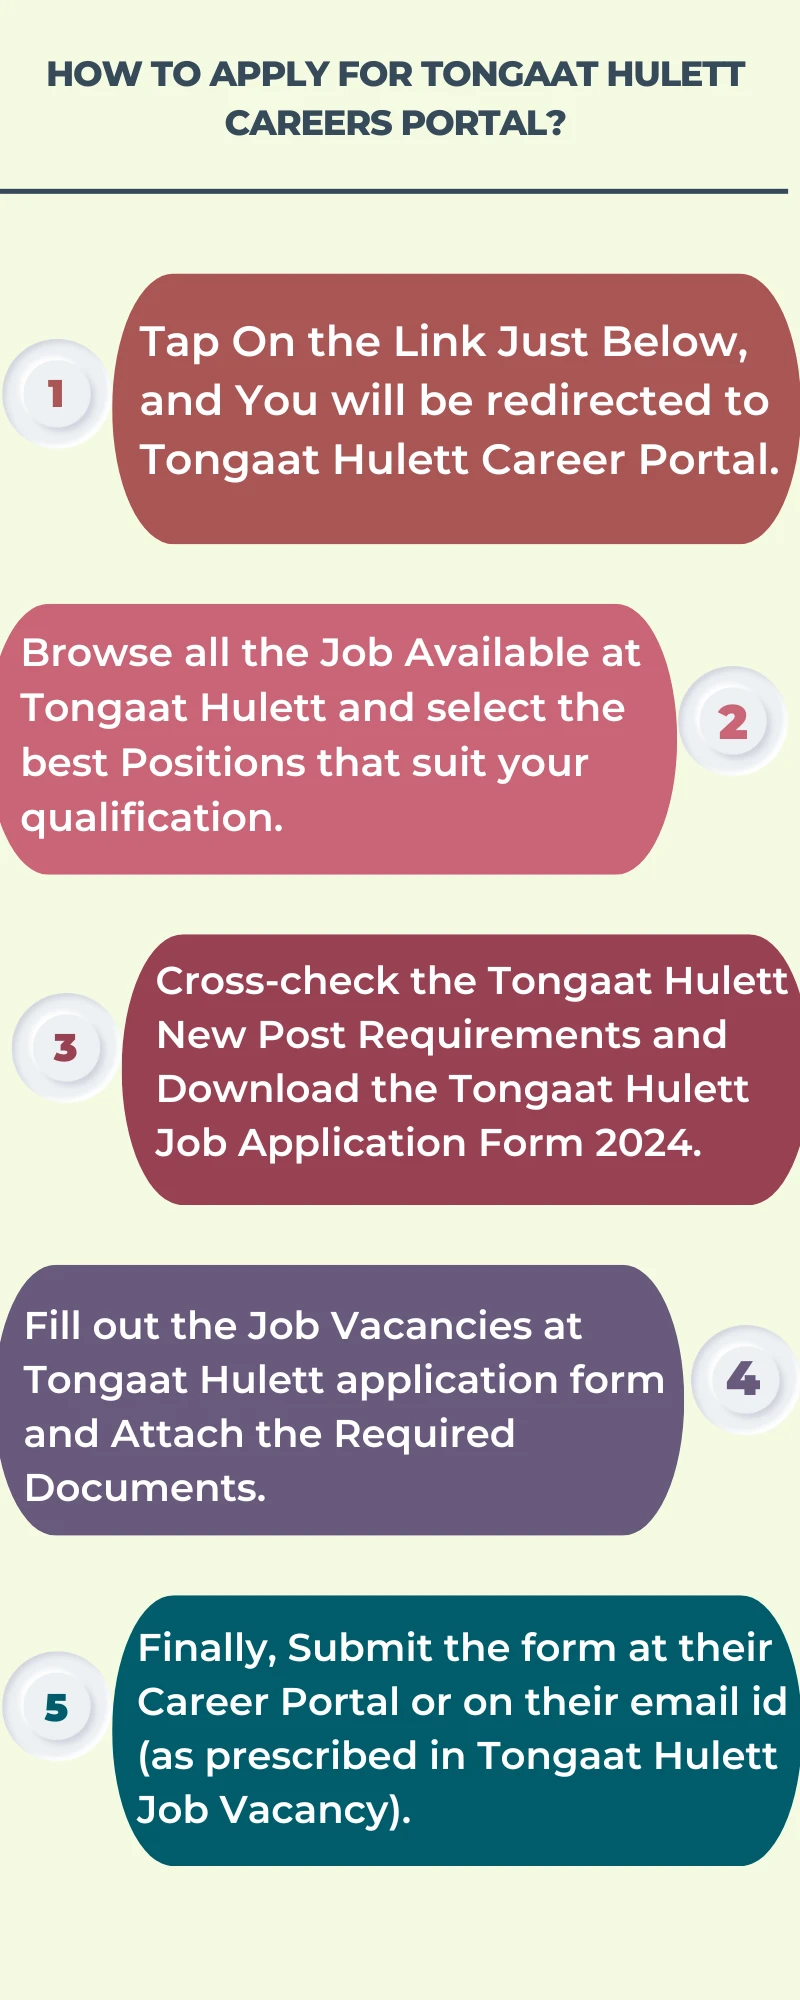 How To Apply for Tongaat Hulett Careers Portal?